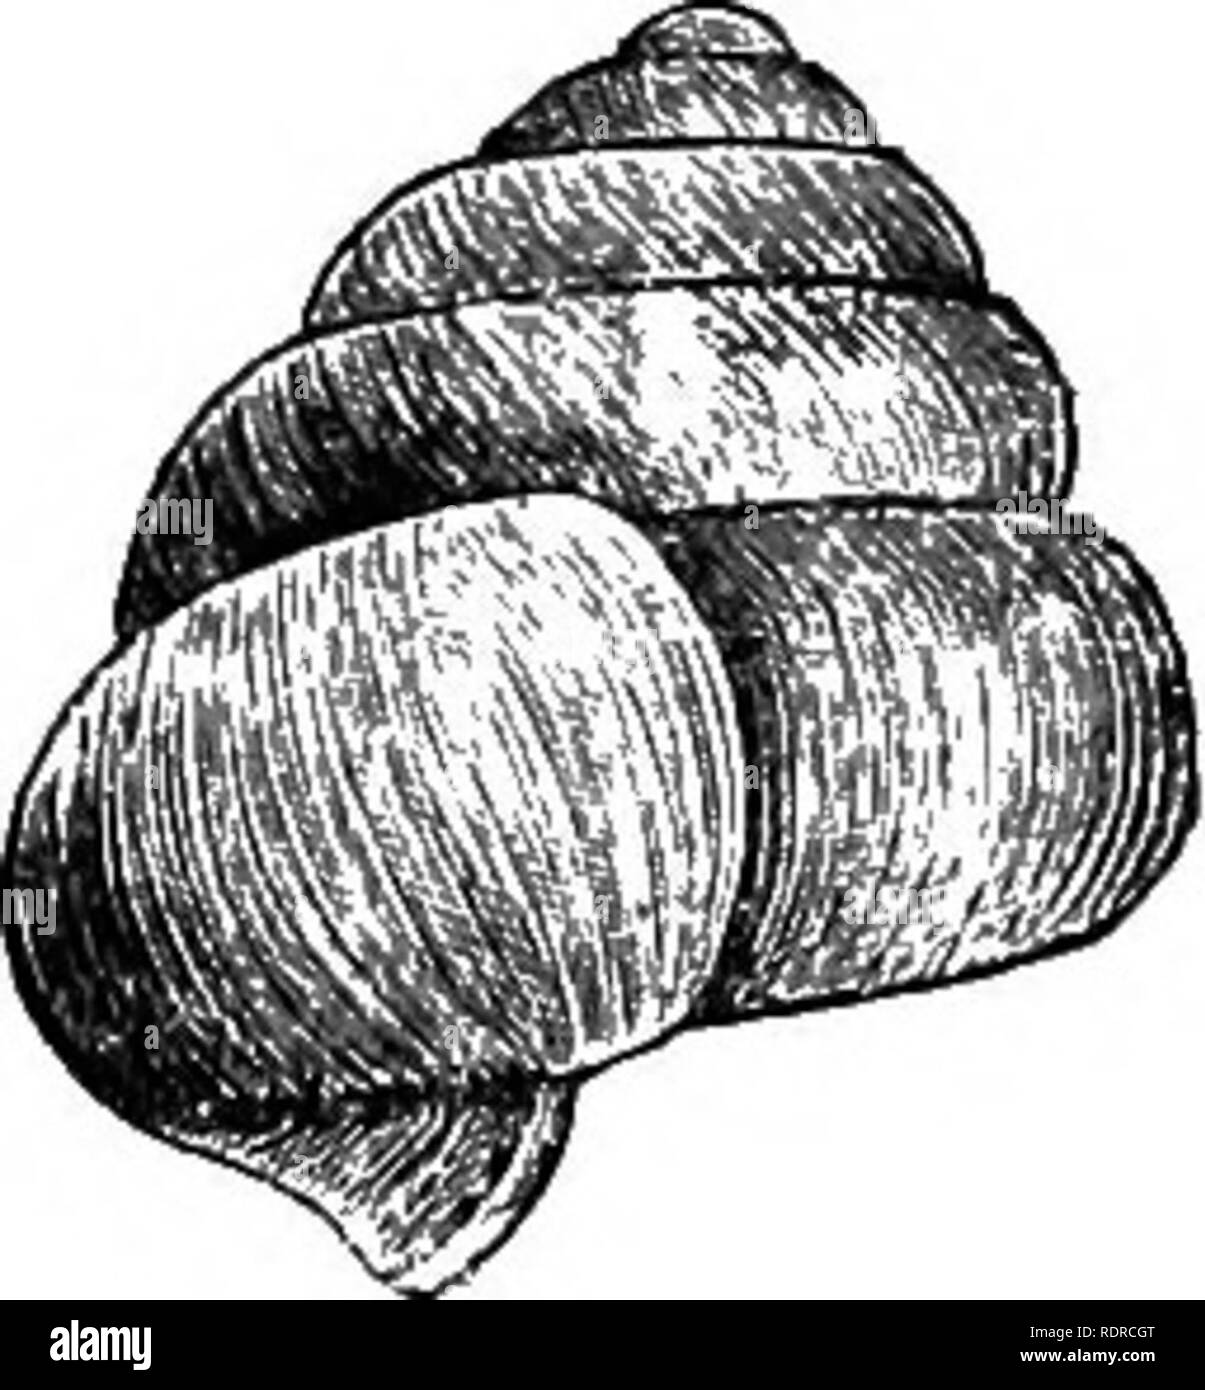 Mollusca ... Mollusks. Pig. 11.âPupisoma cotistrictiim. (From P. Z. S.) had  some doubts as to the generic position of the species. Since, however, in  contour as well as sculpture it accords